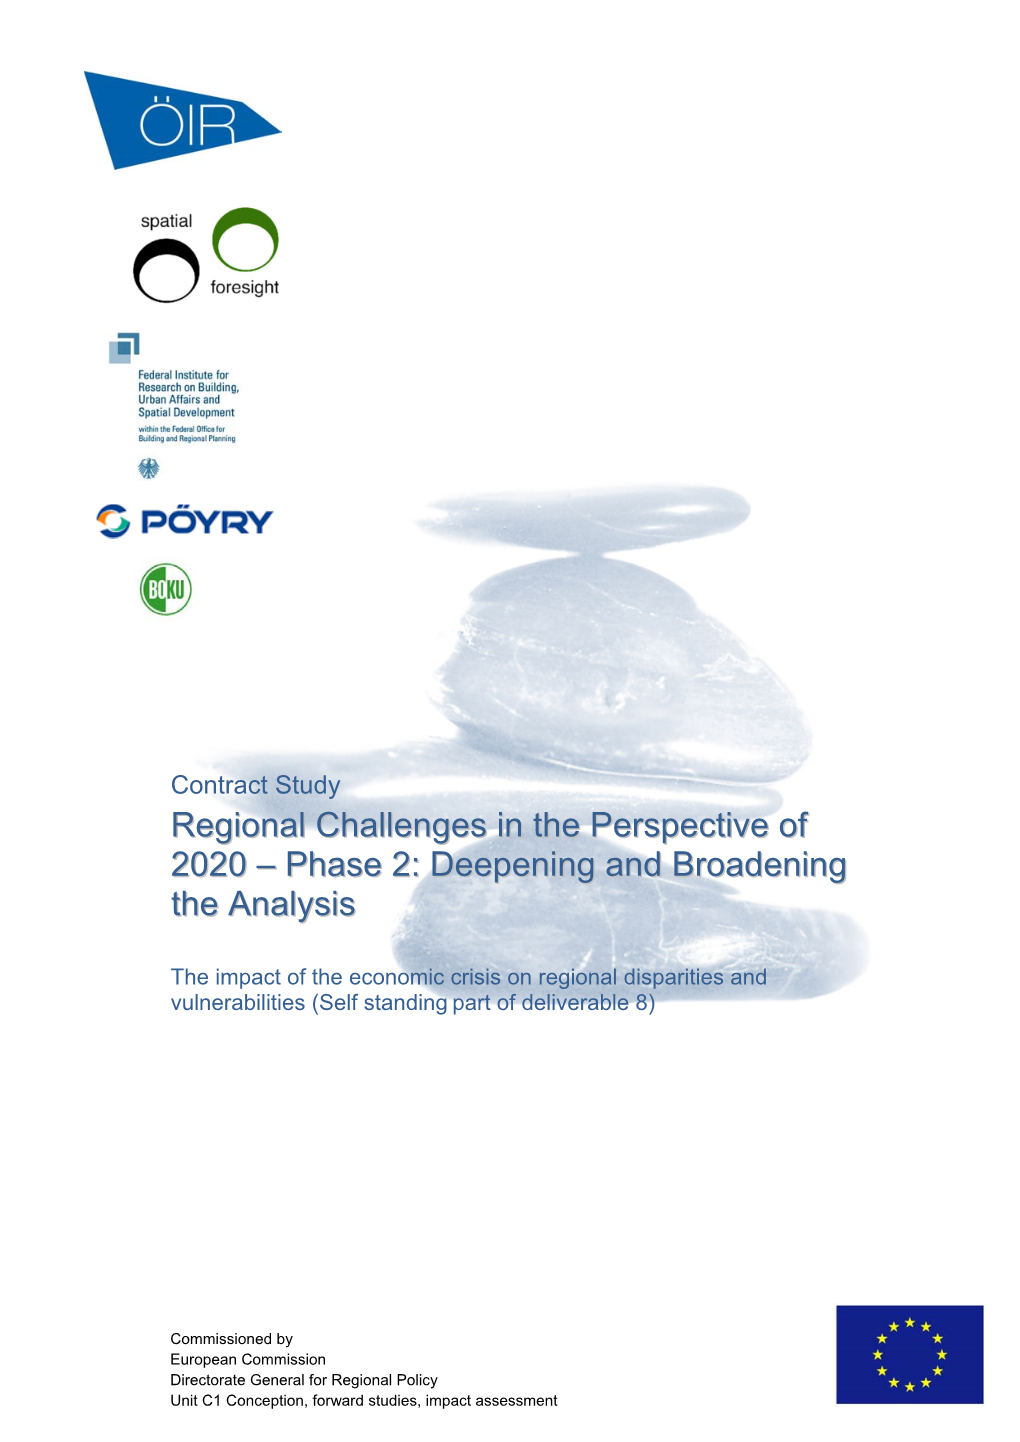 Regional Challenges in the Perspective of 2020 – Phase 2: Deepening and Broadening the Analysis